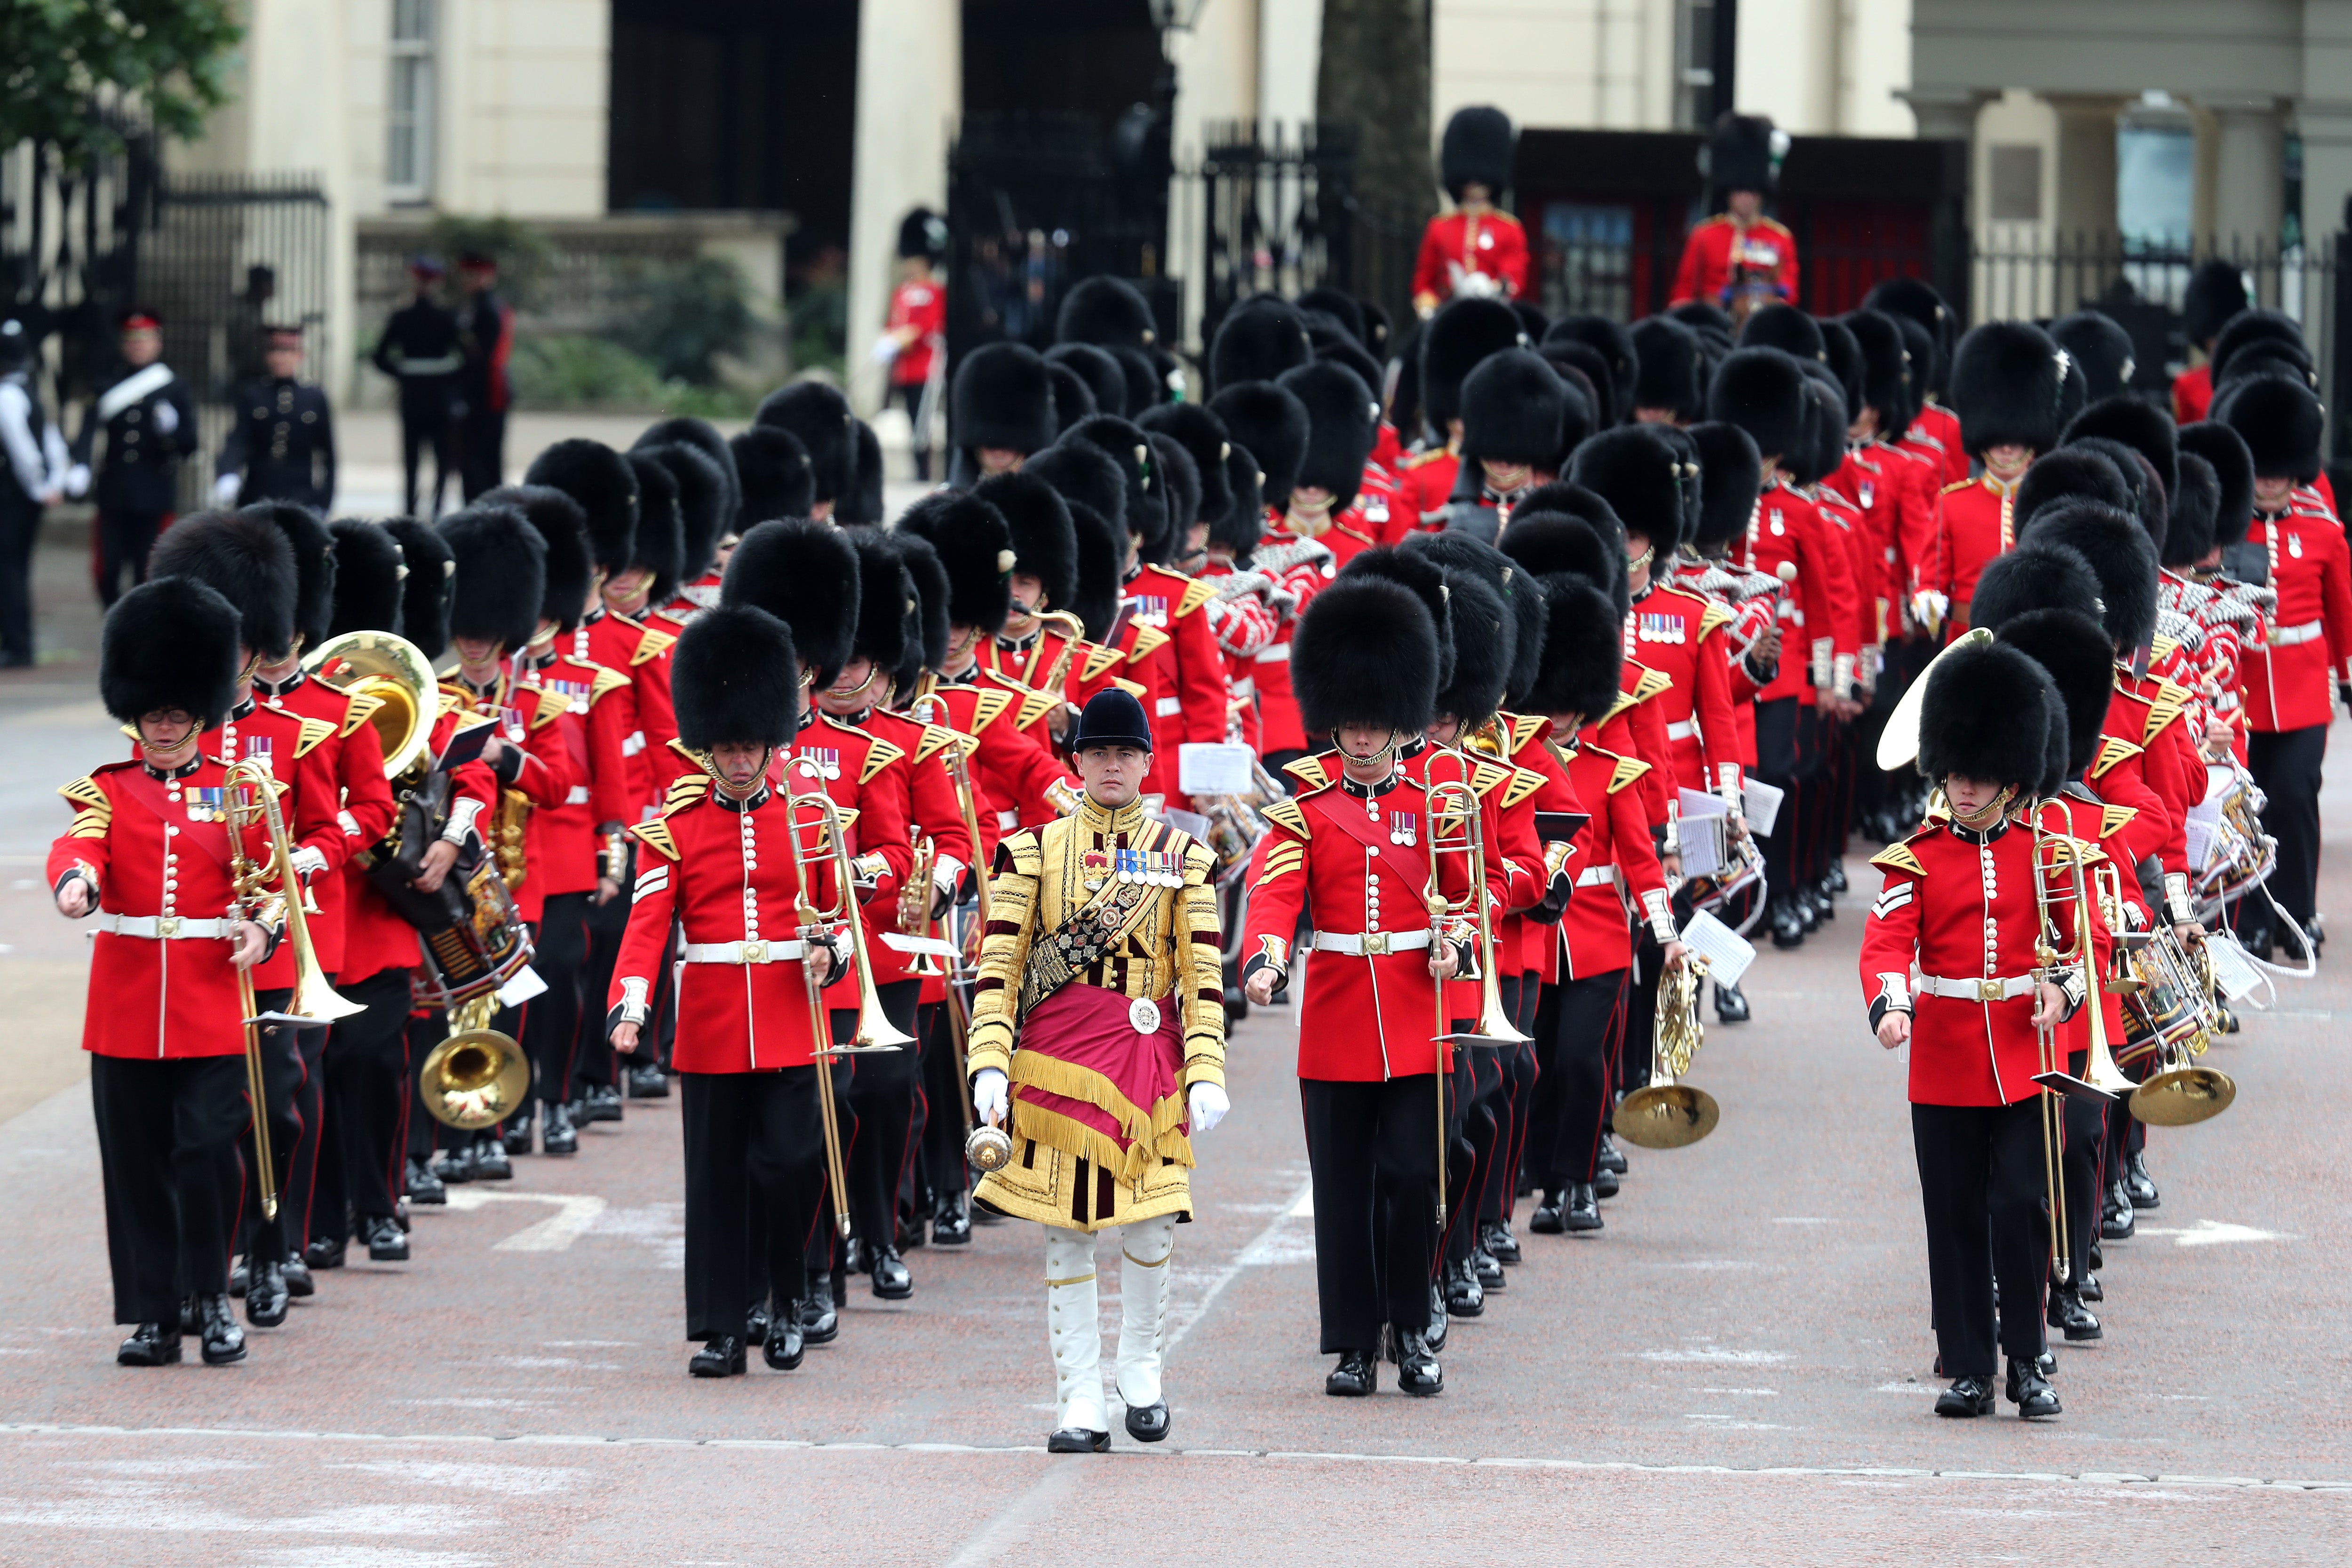 Members of the Welsh Guards march during the Trooping the Colour parade in June 2019